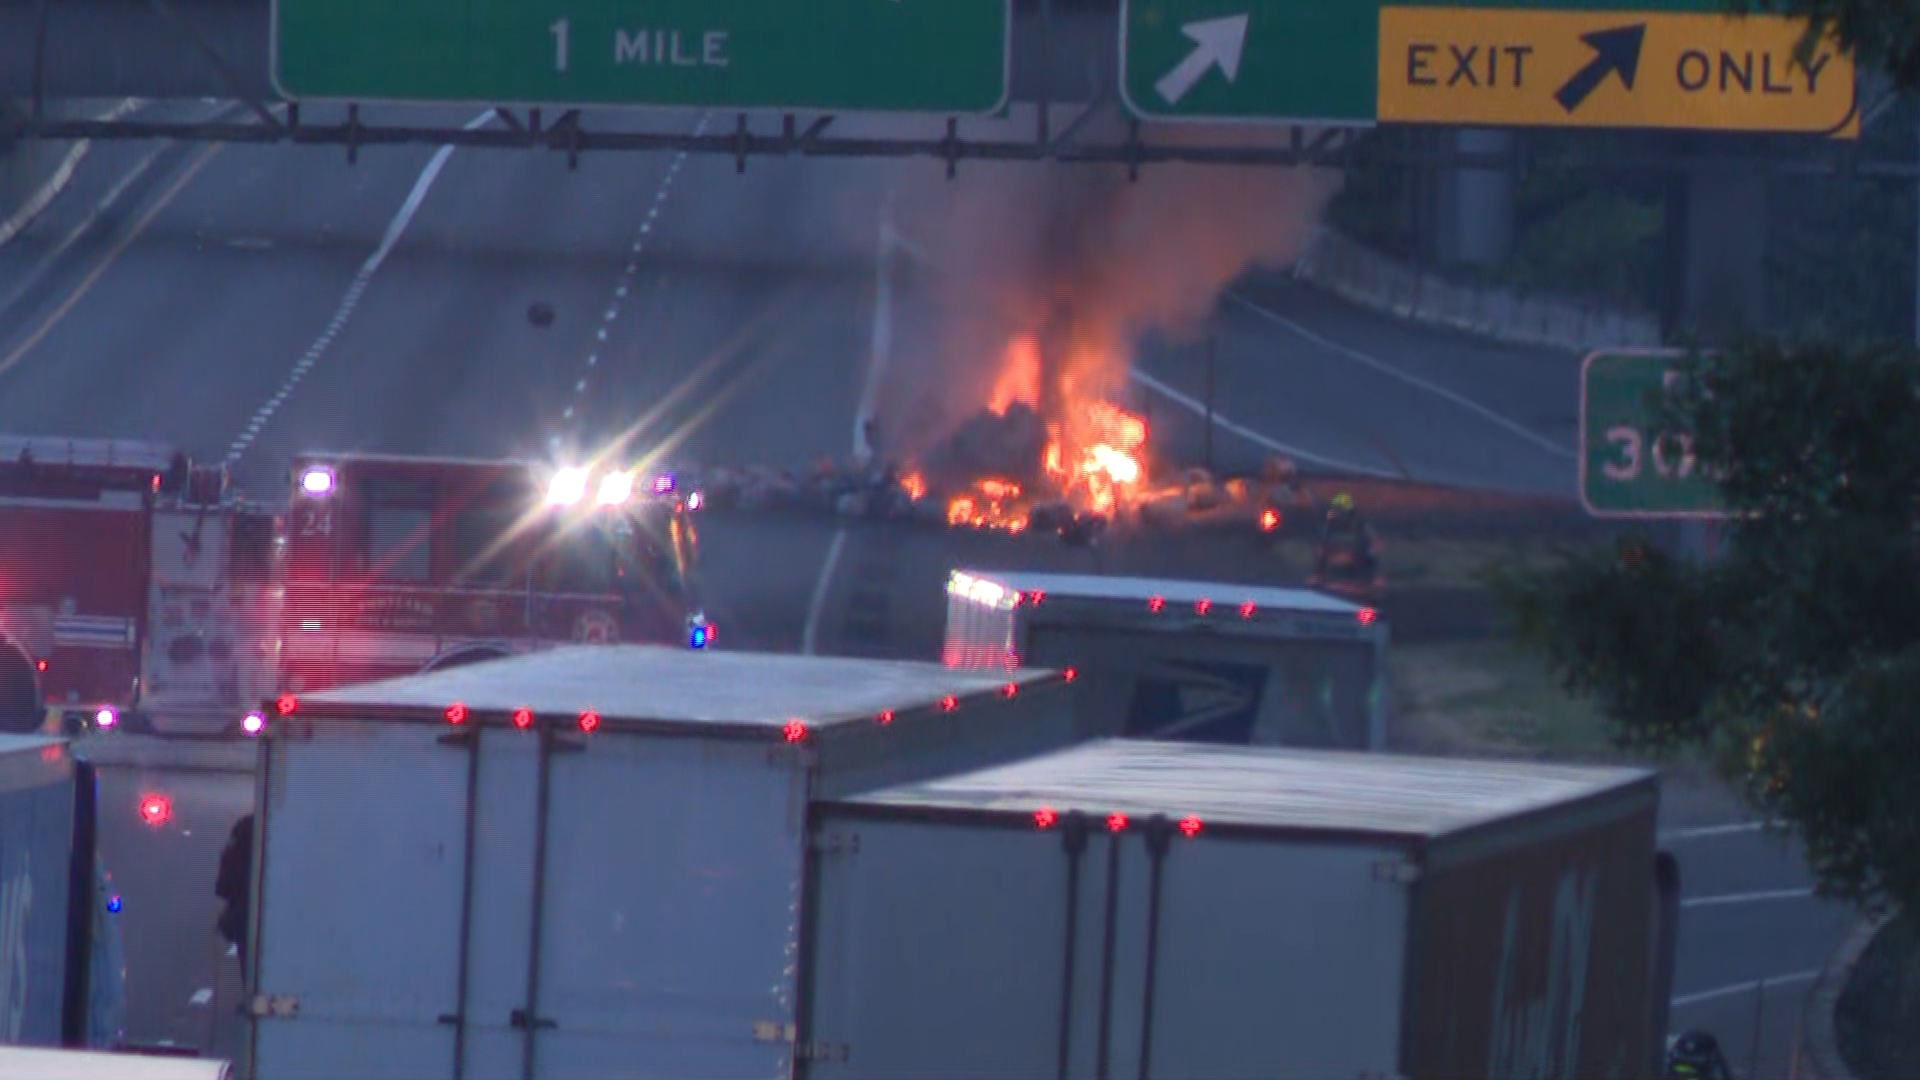 A vehicle fire on I-5 in North Portland caused major traffic delays Tuesday morning.